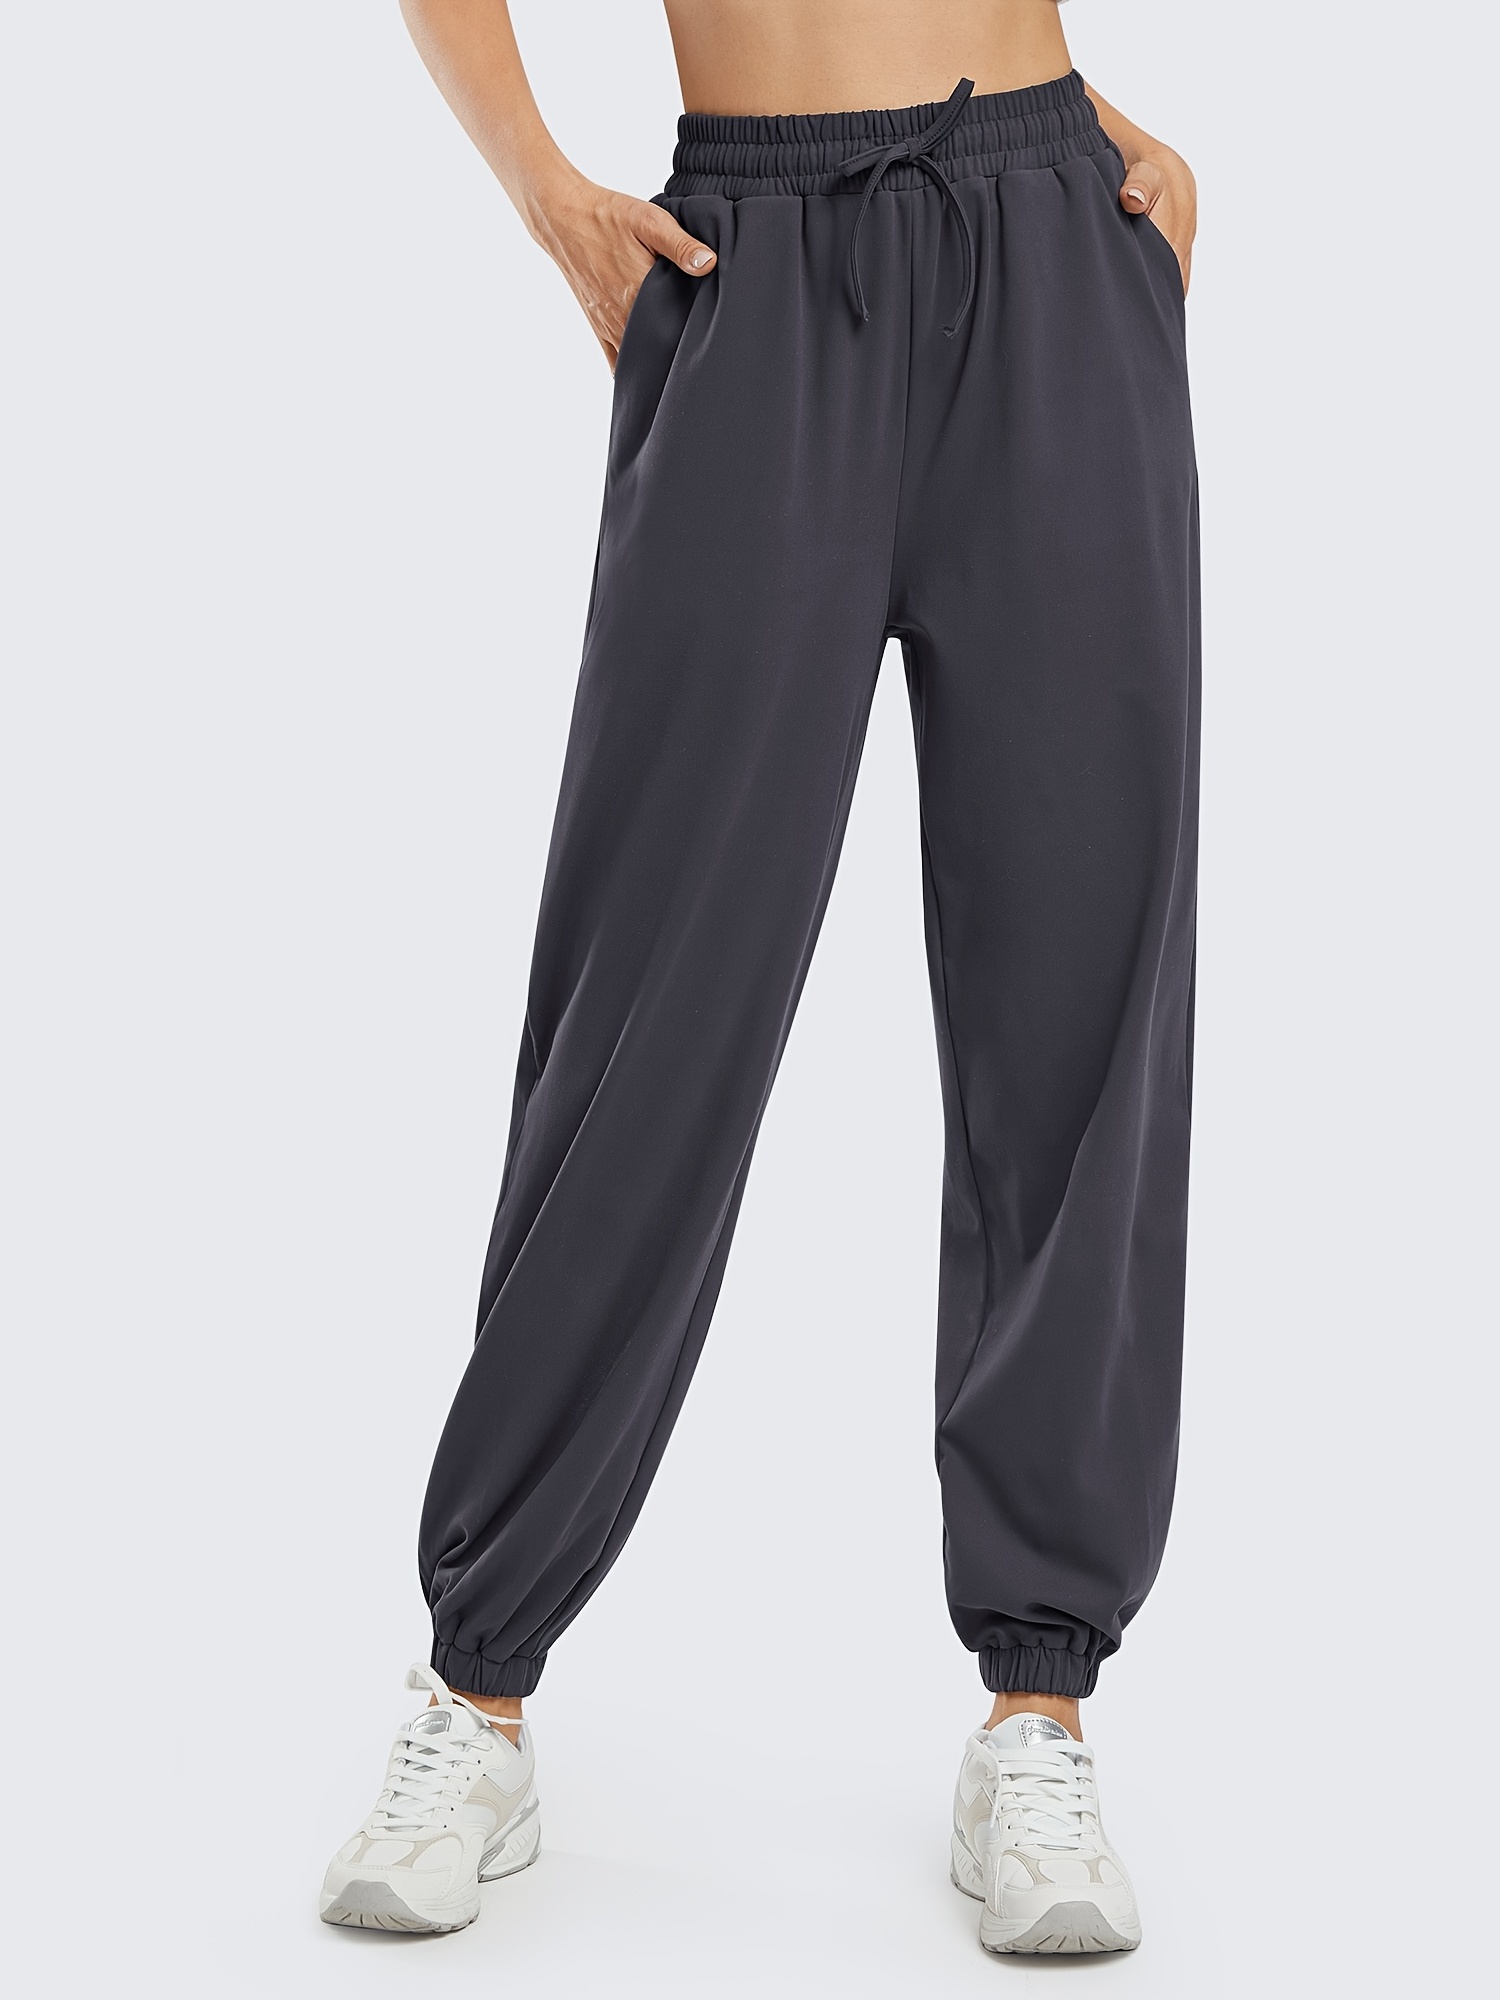 Sweatpants for Tall Women High Waisted Active Running Pants Cinch Bottom  Joggers with Pockets Fashion 2023